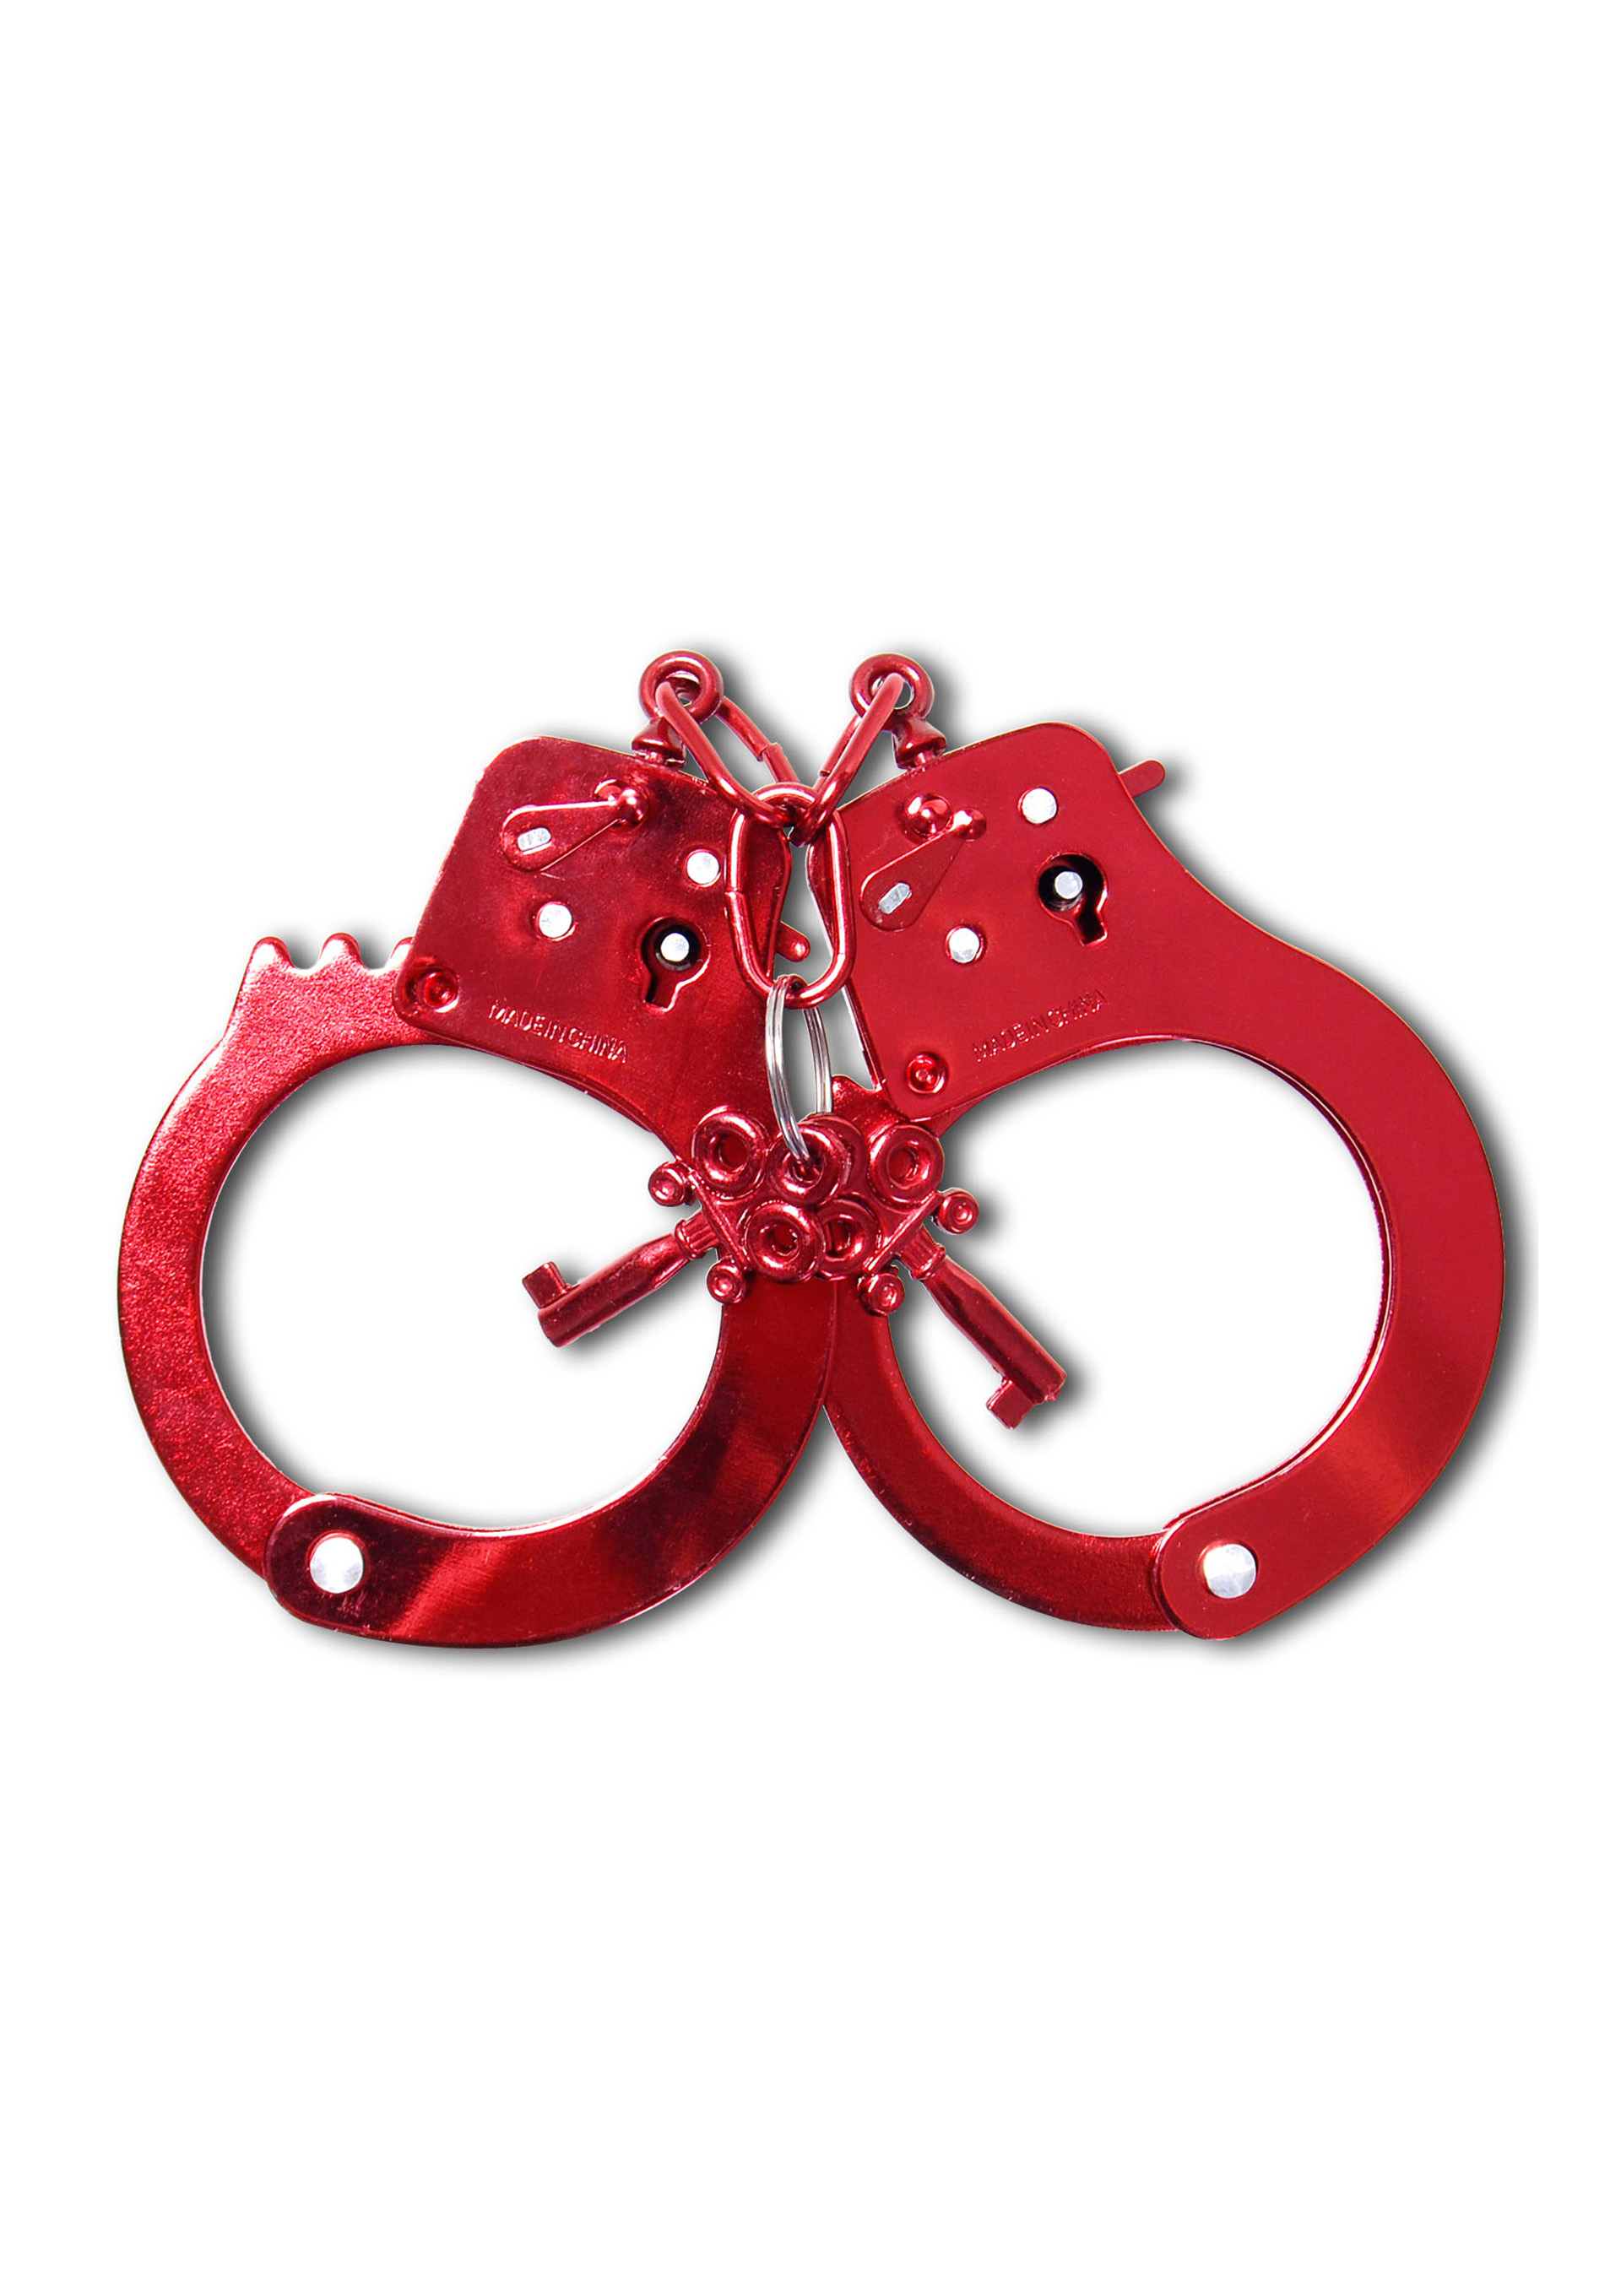 ANODIZED CUFFS RED.